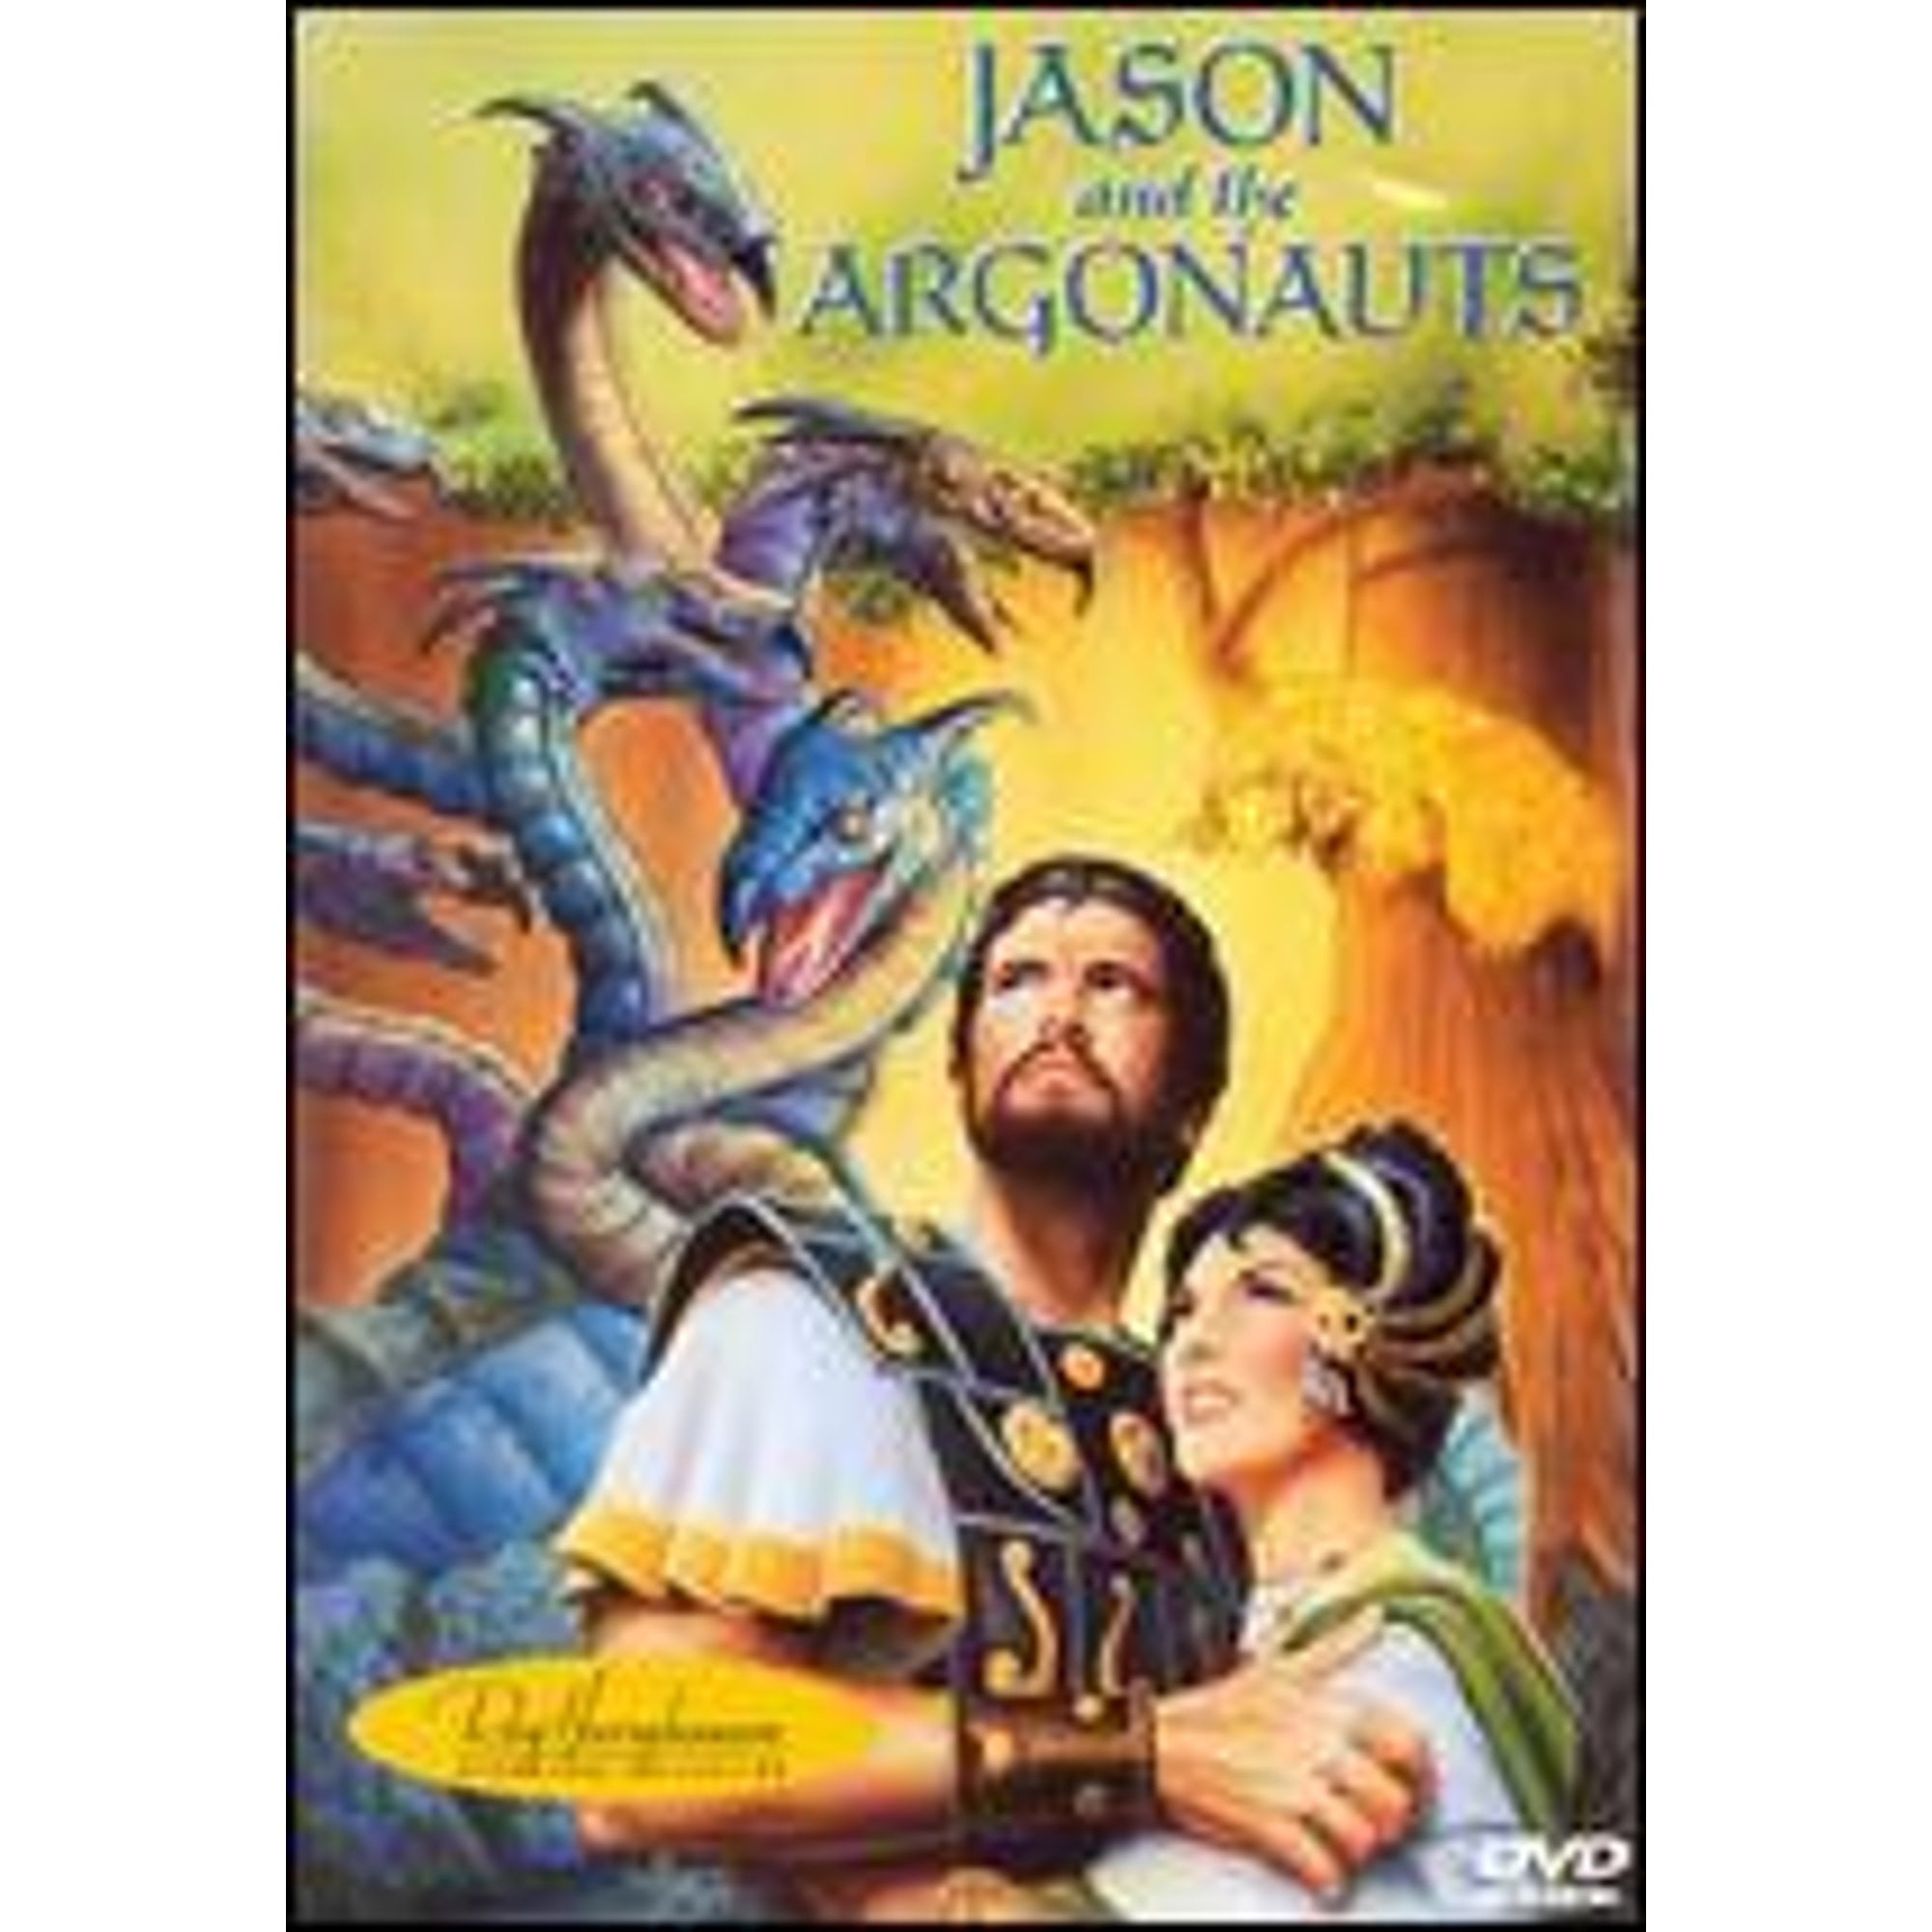 Pre-Owned Jason and the Argonauts (DVD 0043396002593) directed by Don Chaffey